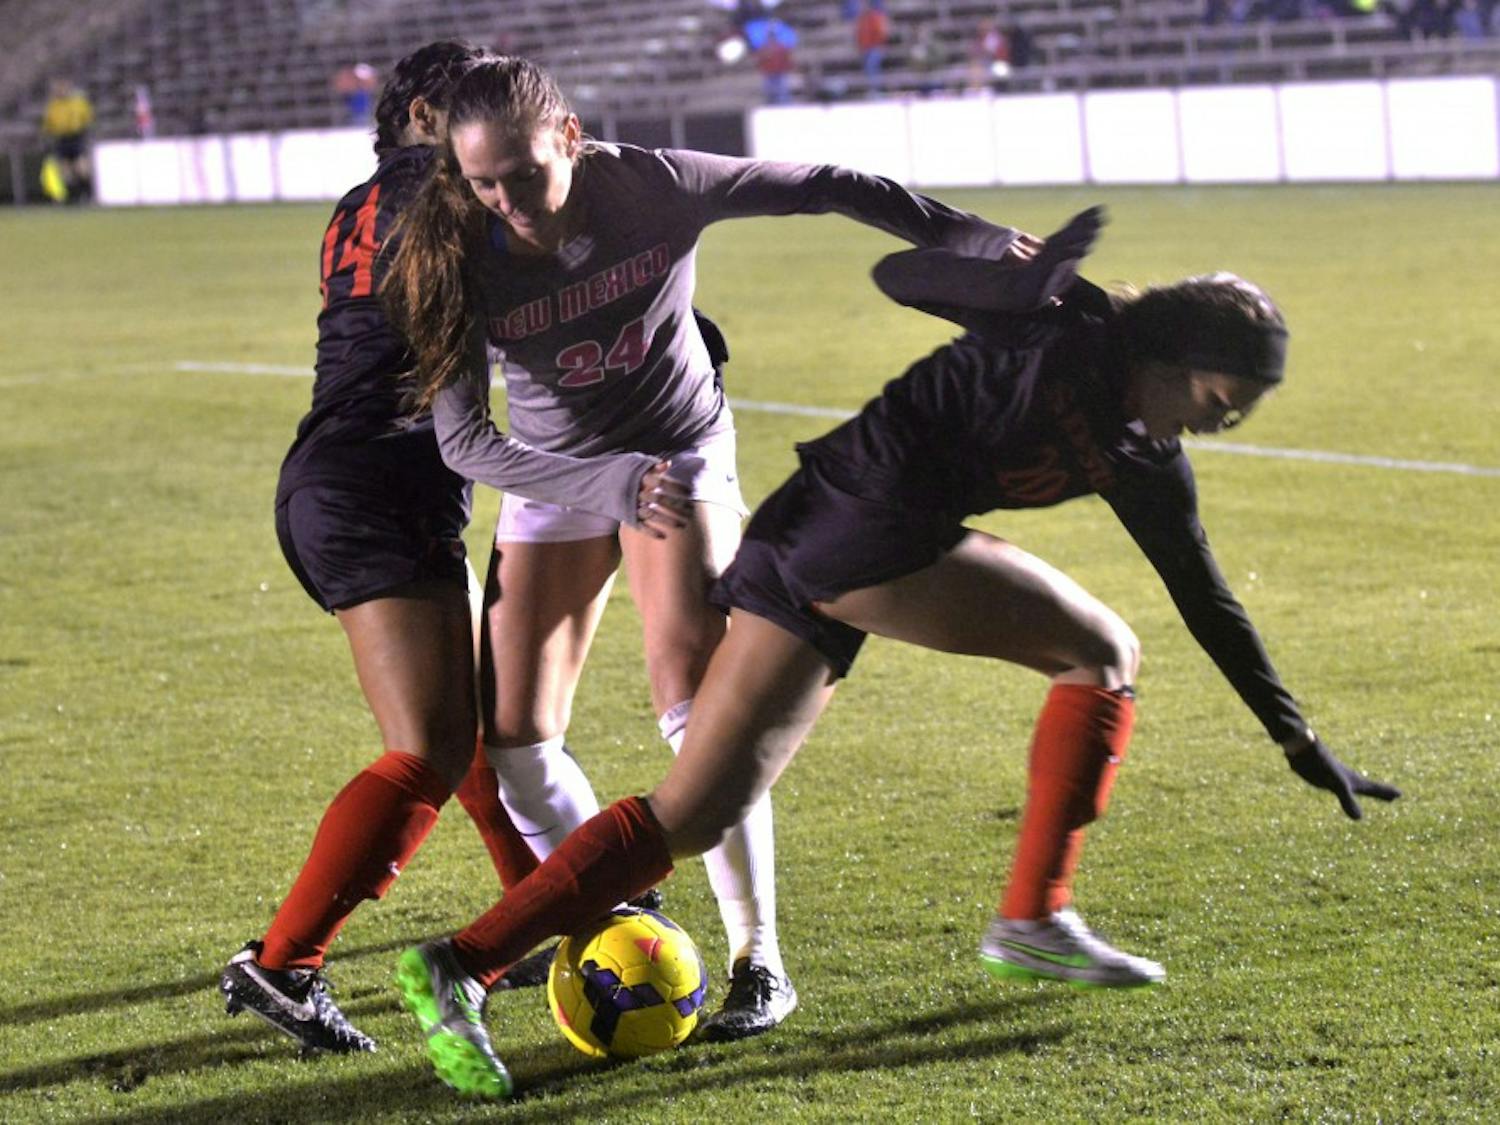 Senior forward Madisyn Olguin fights off two San Diego State players at the UNM Soccer Complex Friday night. The Lobos lost to San Diego State 2-1 and will begin play in the Mountain West tournament Tuesday against UNLV.